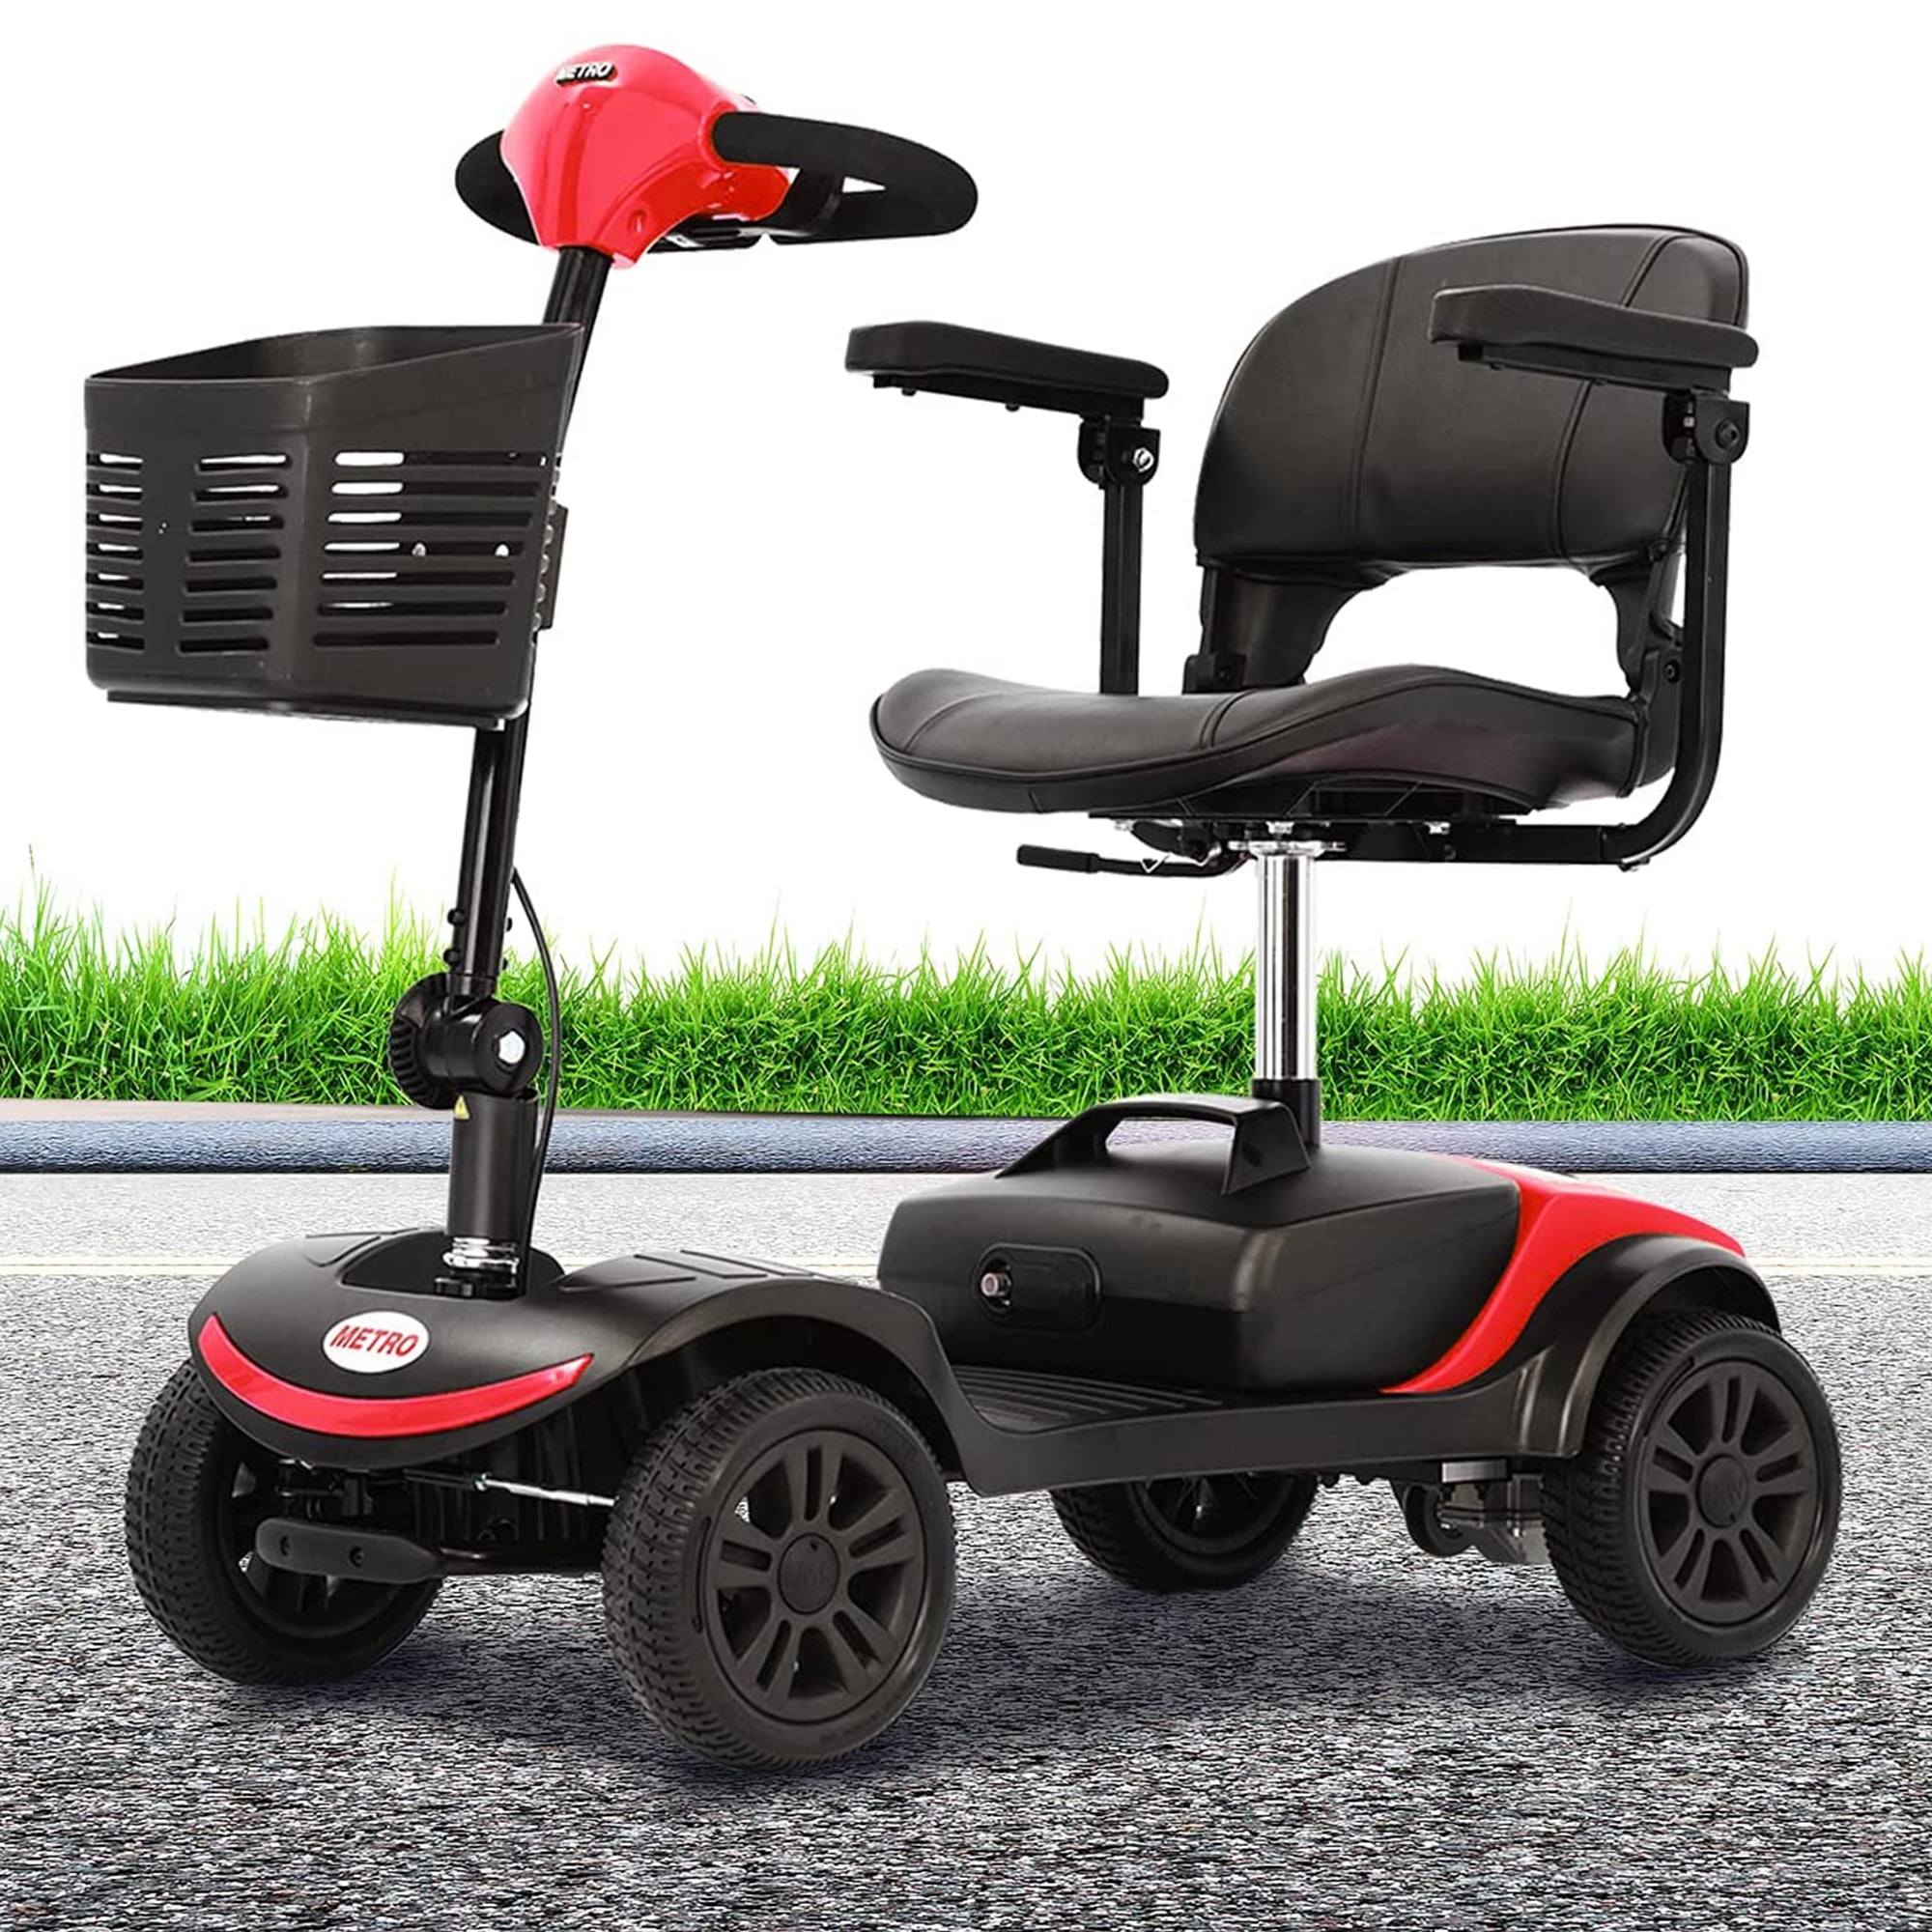 ENGWE Scout Compact Travel Power Scooter, Compact Heavy Duty